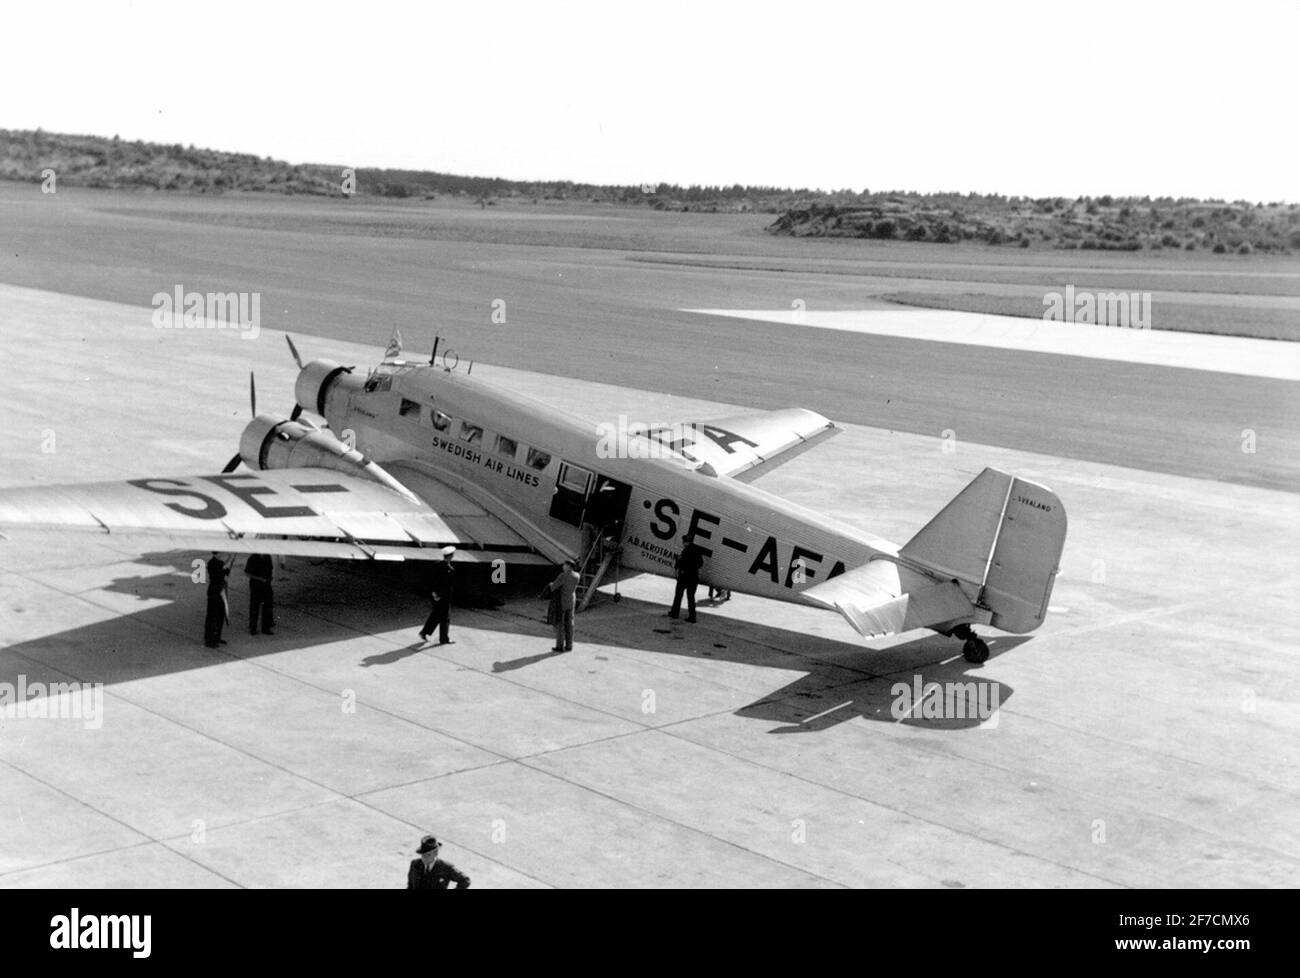 Passenger Airplane Junkers Ju 52 Number SE-AFA at Bromma Airport, 1938 Motiva: The Company Aerotransports Airplane Junkers Ju 52 number SE-AFA from the side of Bromma airport. The image scanned from Alan Granston's album. Only digital file in FVM's ownership. Stock Photo